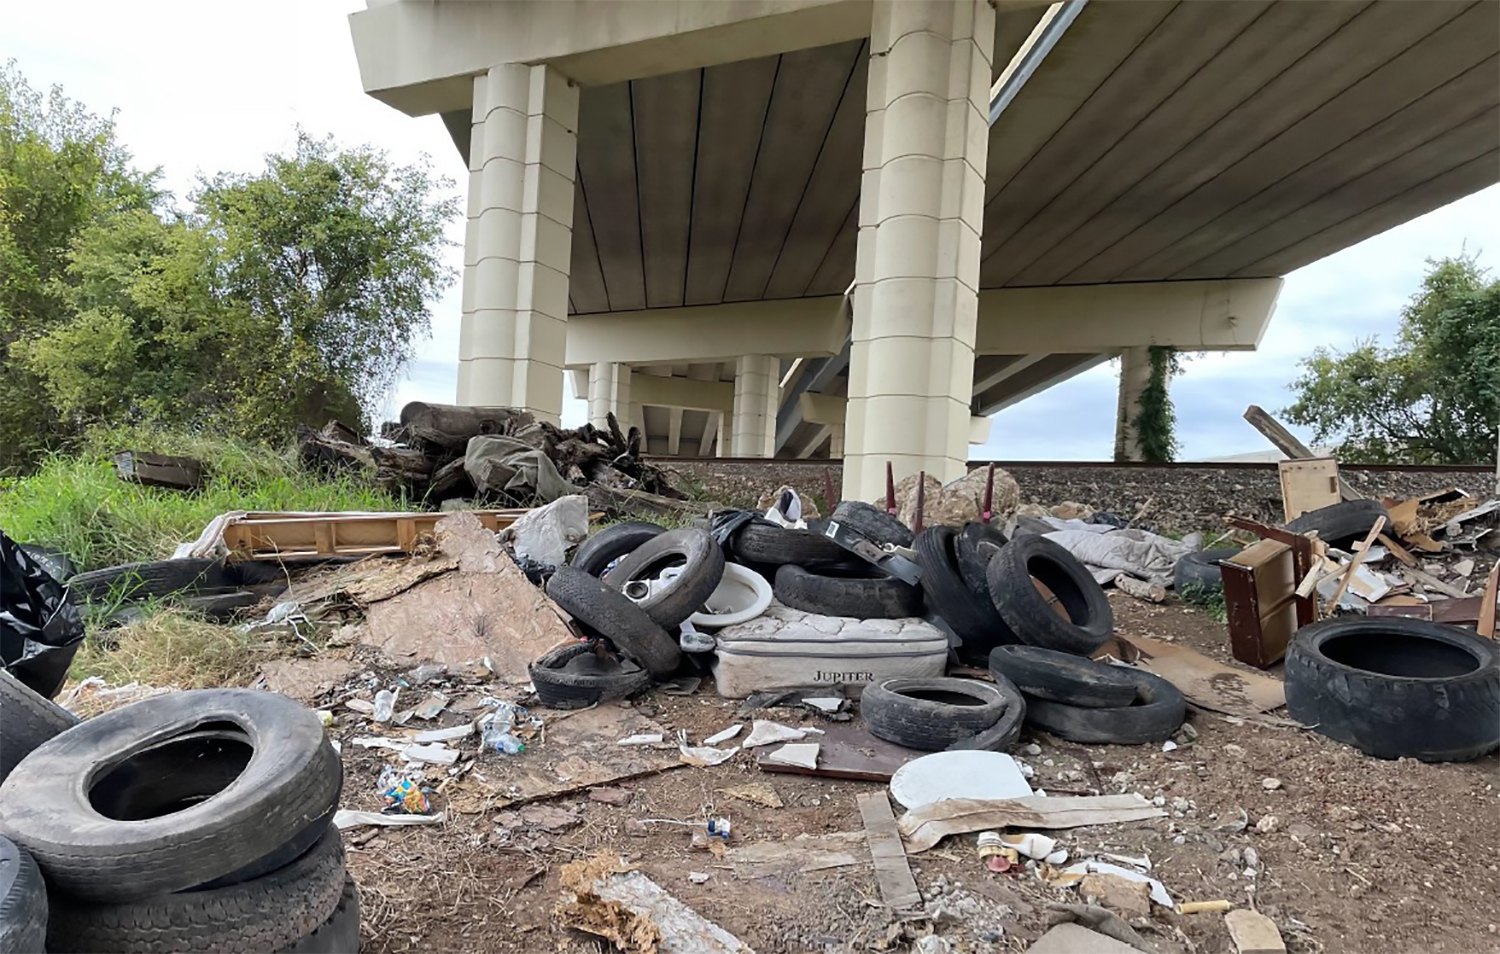 Tires and trash under a highway.